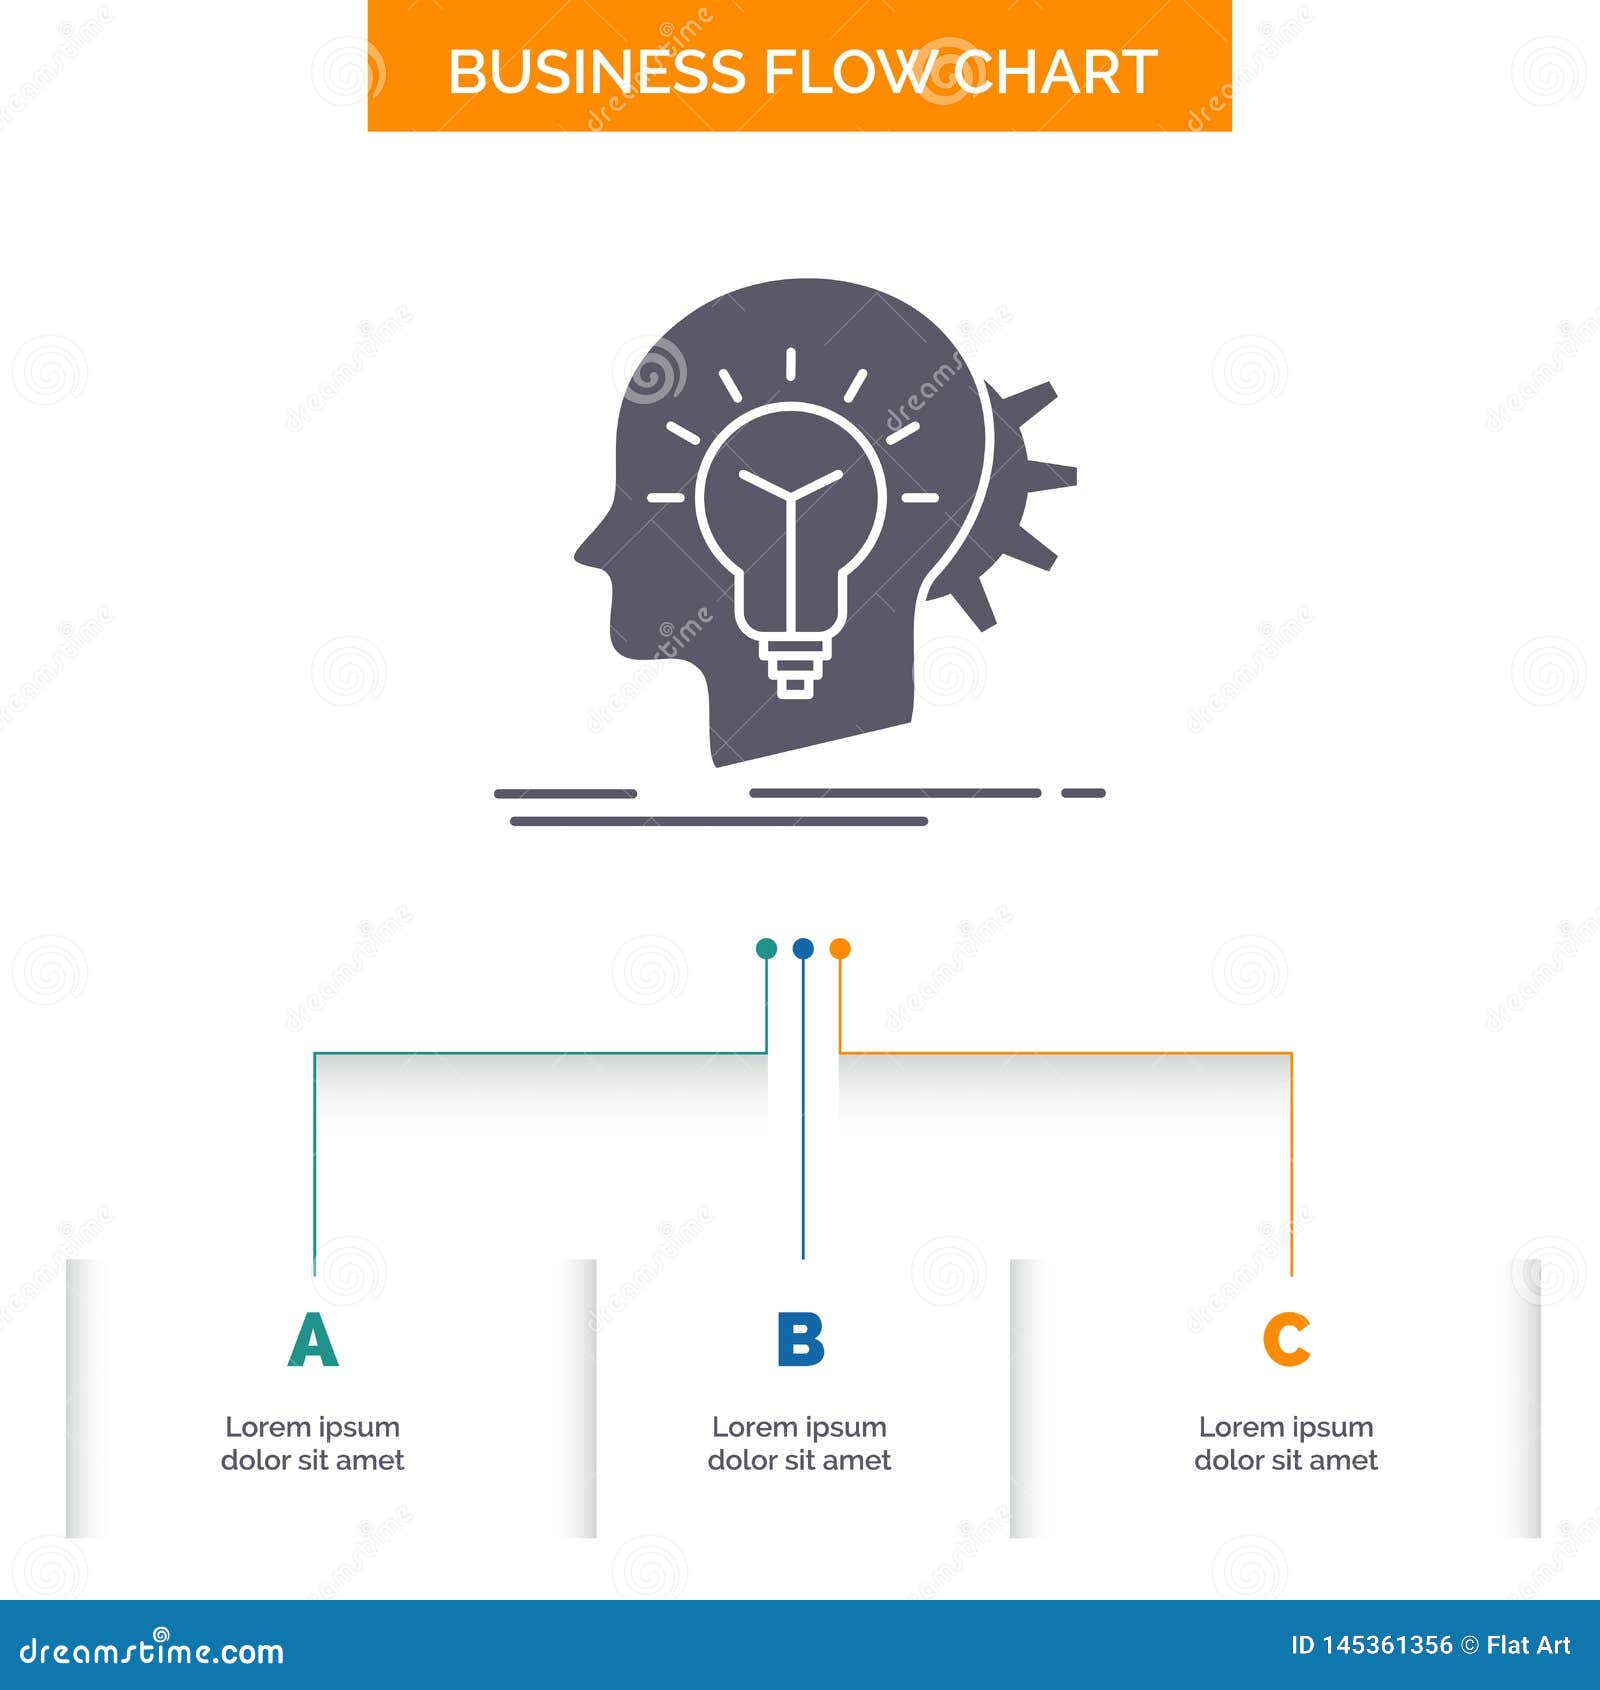 Flow Chart For Starting A Business